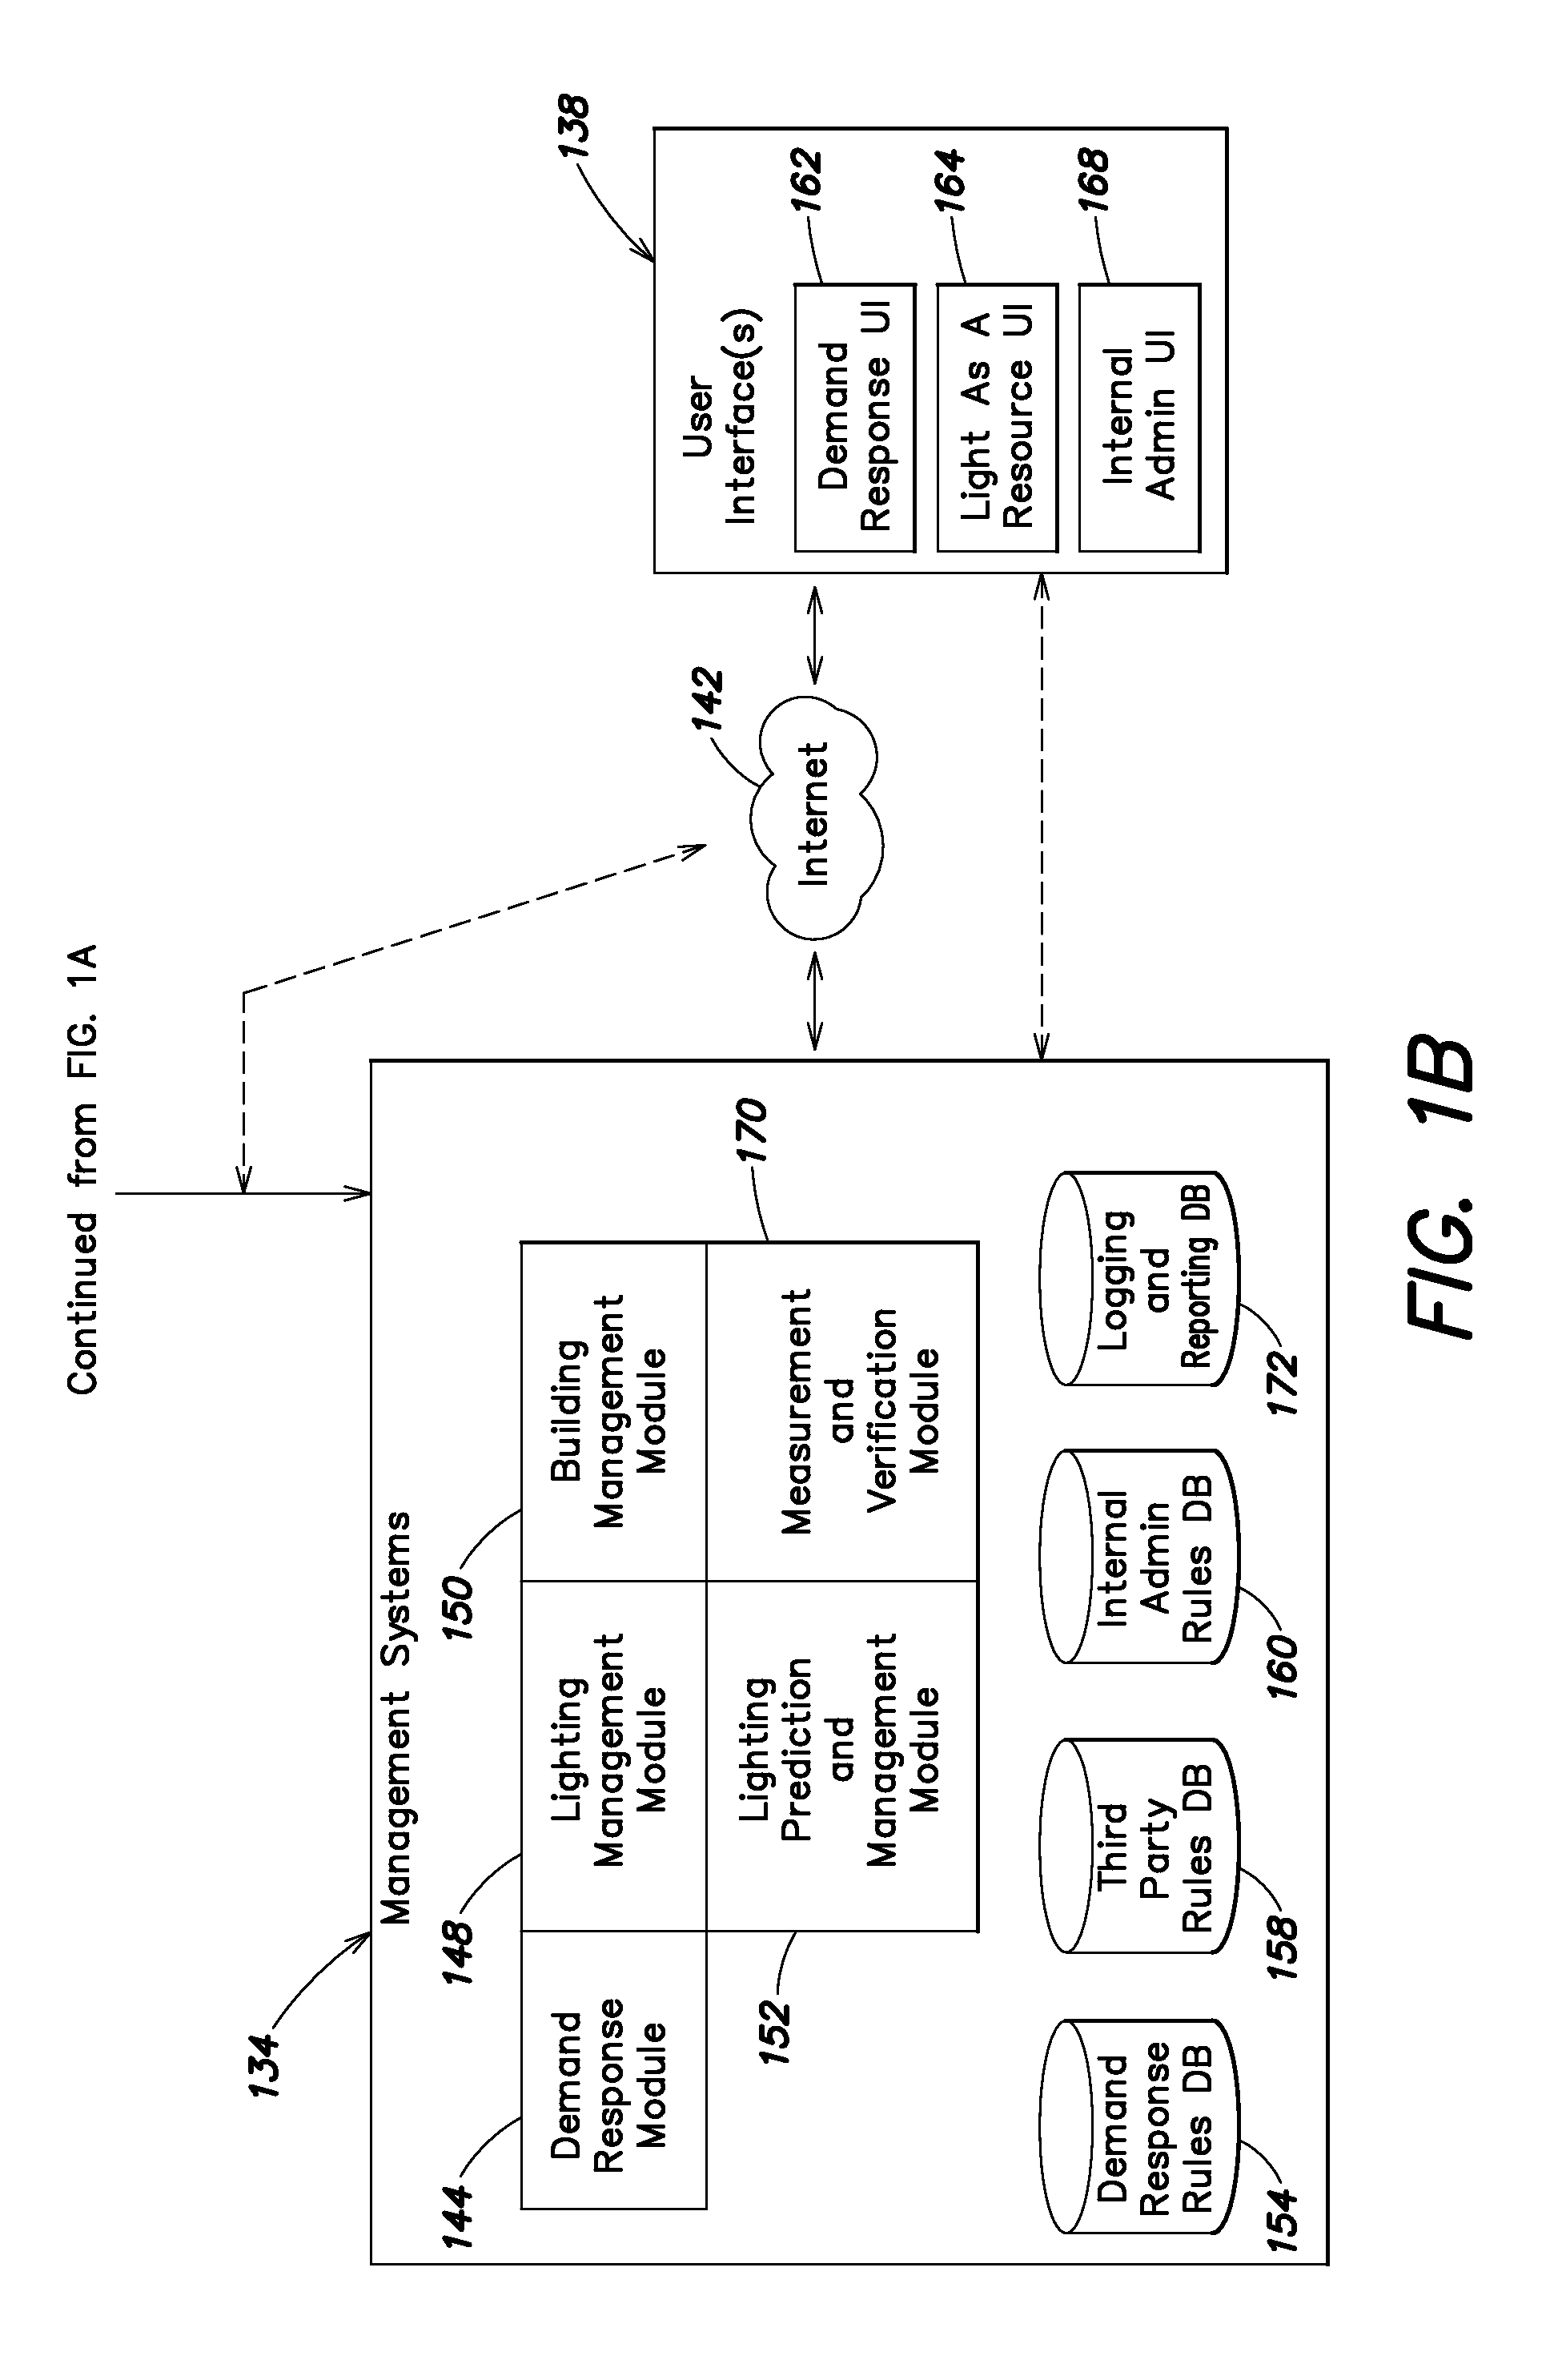 LED-based lighting methods, apparatus, and systems employing LED light bars, occupancy sensing, local state machine, and time-based tracking of operational modes